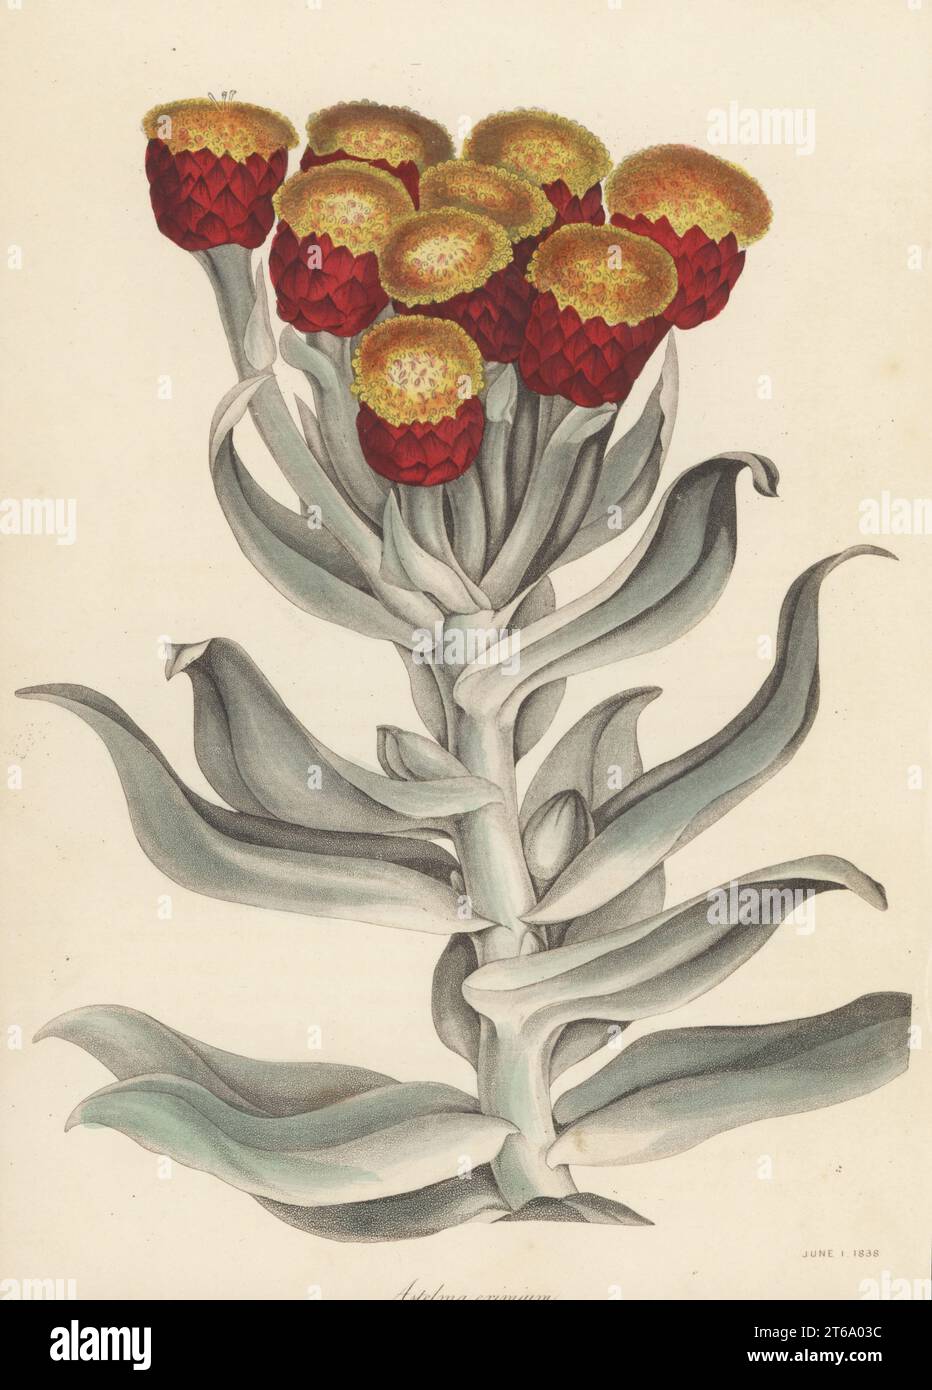 Everlasting, Syncarpha eximia. Native to the Eastern and Western Cape, South Africa, introduced by Scottish plant collector Colonel William Patterson in 1793. Fine astelma, Astelma eximium, Gnaphalium eximium. Handcoloured lithograph from Joseph Paxtons Magazine of Botany, and Register of Flowering Plants, Volume 5, Orr and Smith, London, 1838. Stock Photo